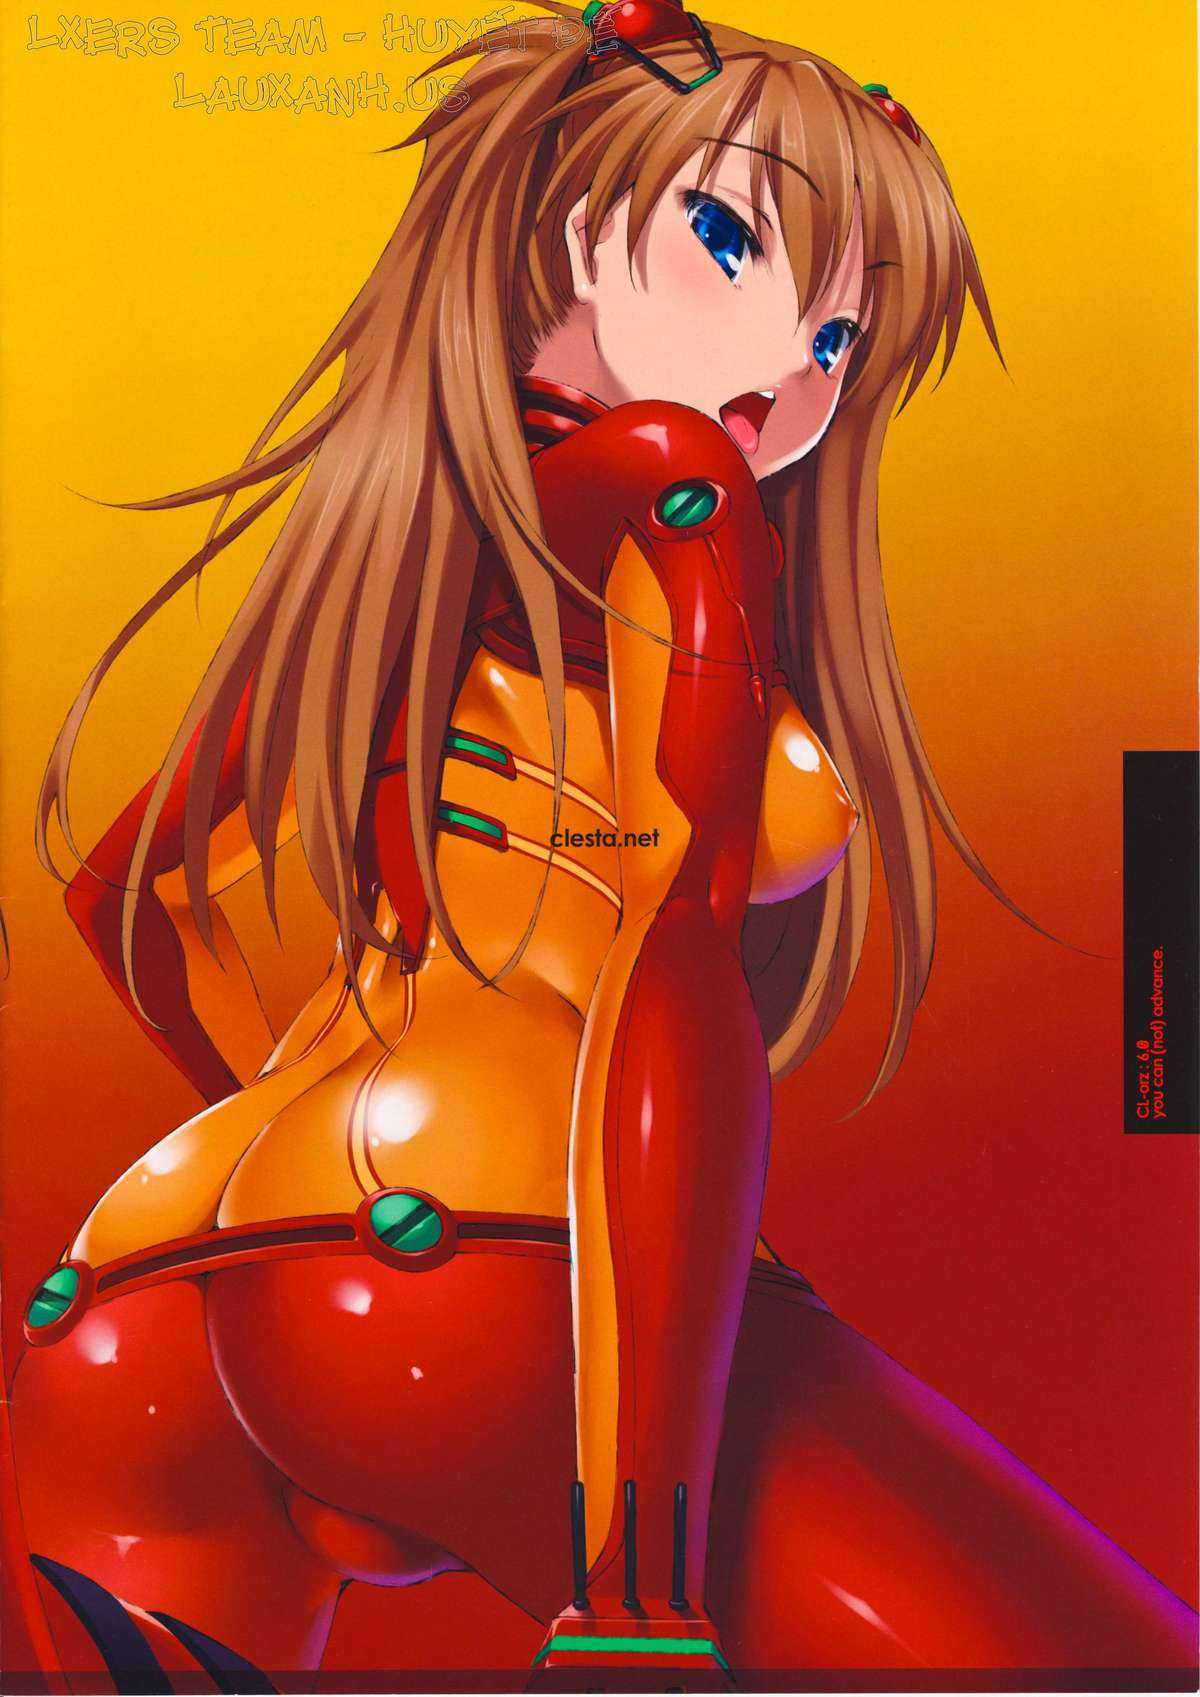 (C76) [etcycle (Cle Masahiro)] CL-orz 6.0 you can (not) advance (Rebuild of Evangelion) [Vietnamese] (C76) [etcycle （呉マサヒロ）] CL-orz 06 (ヱヴァンゲリヲン新劇場版) [ベトナム語翻訳]